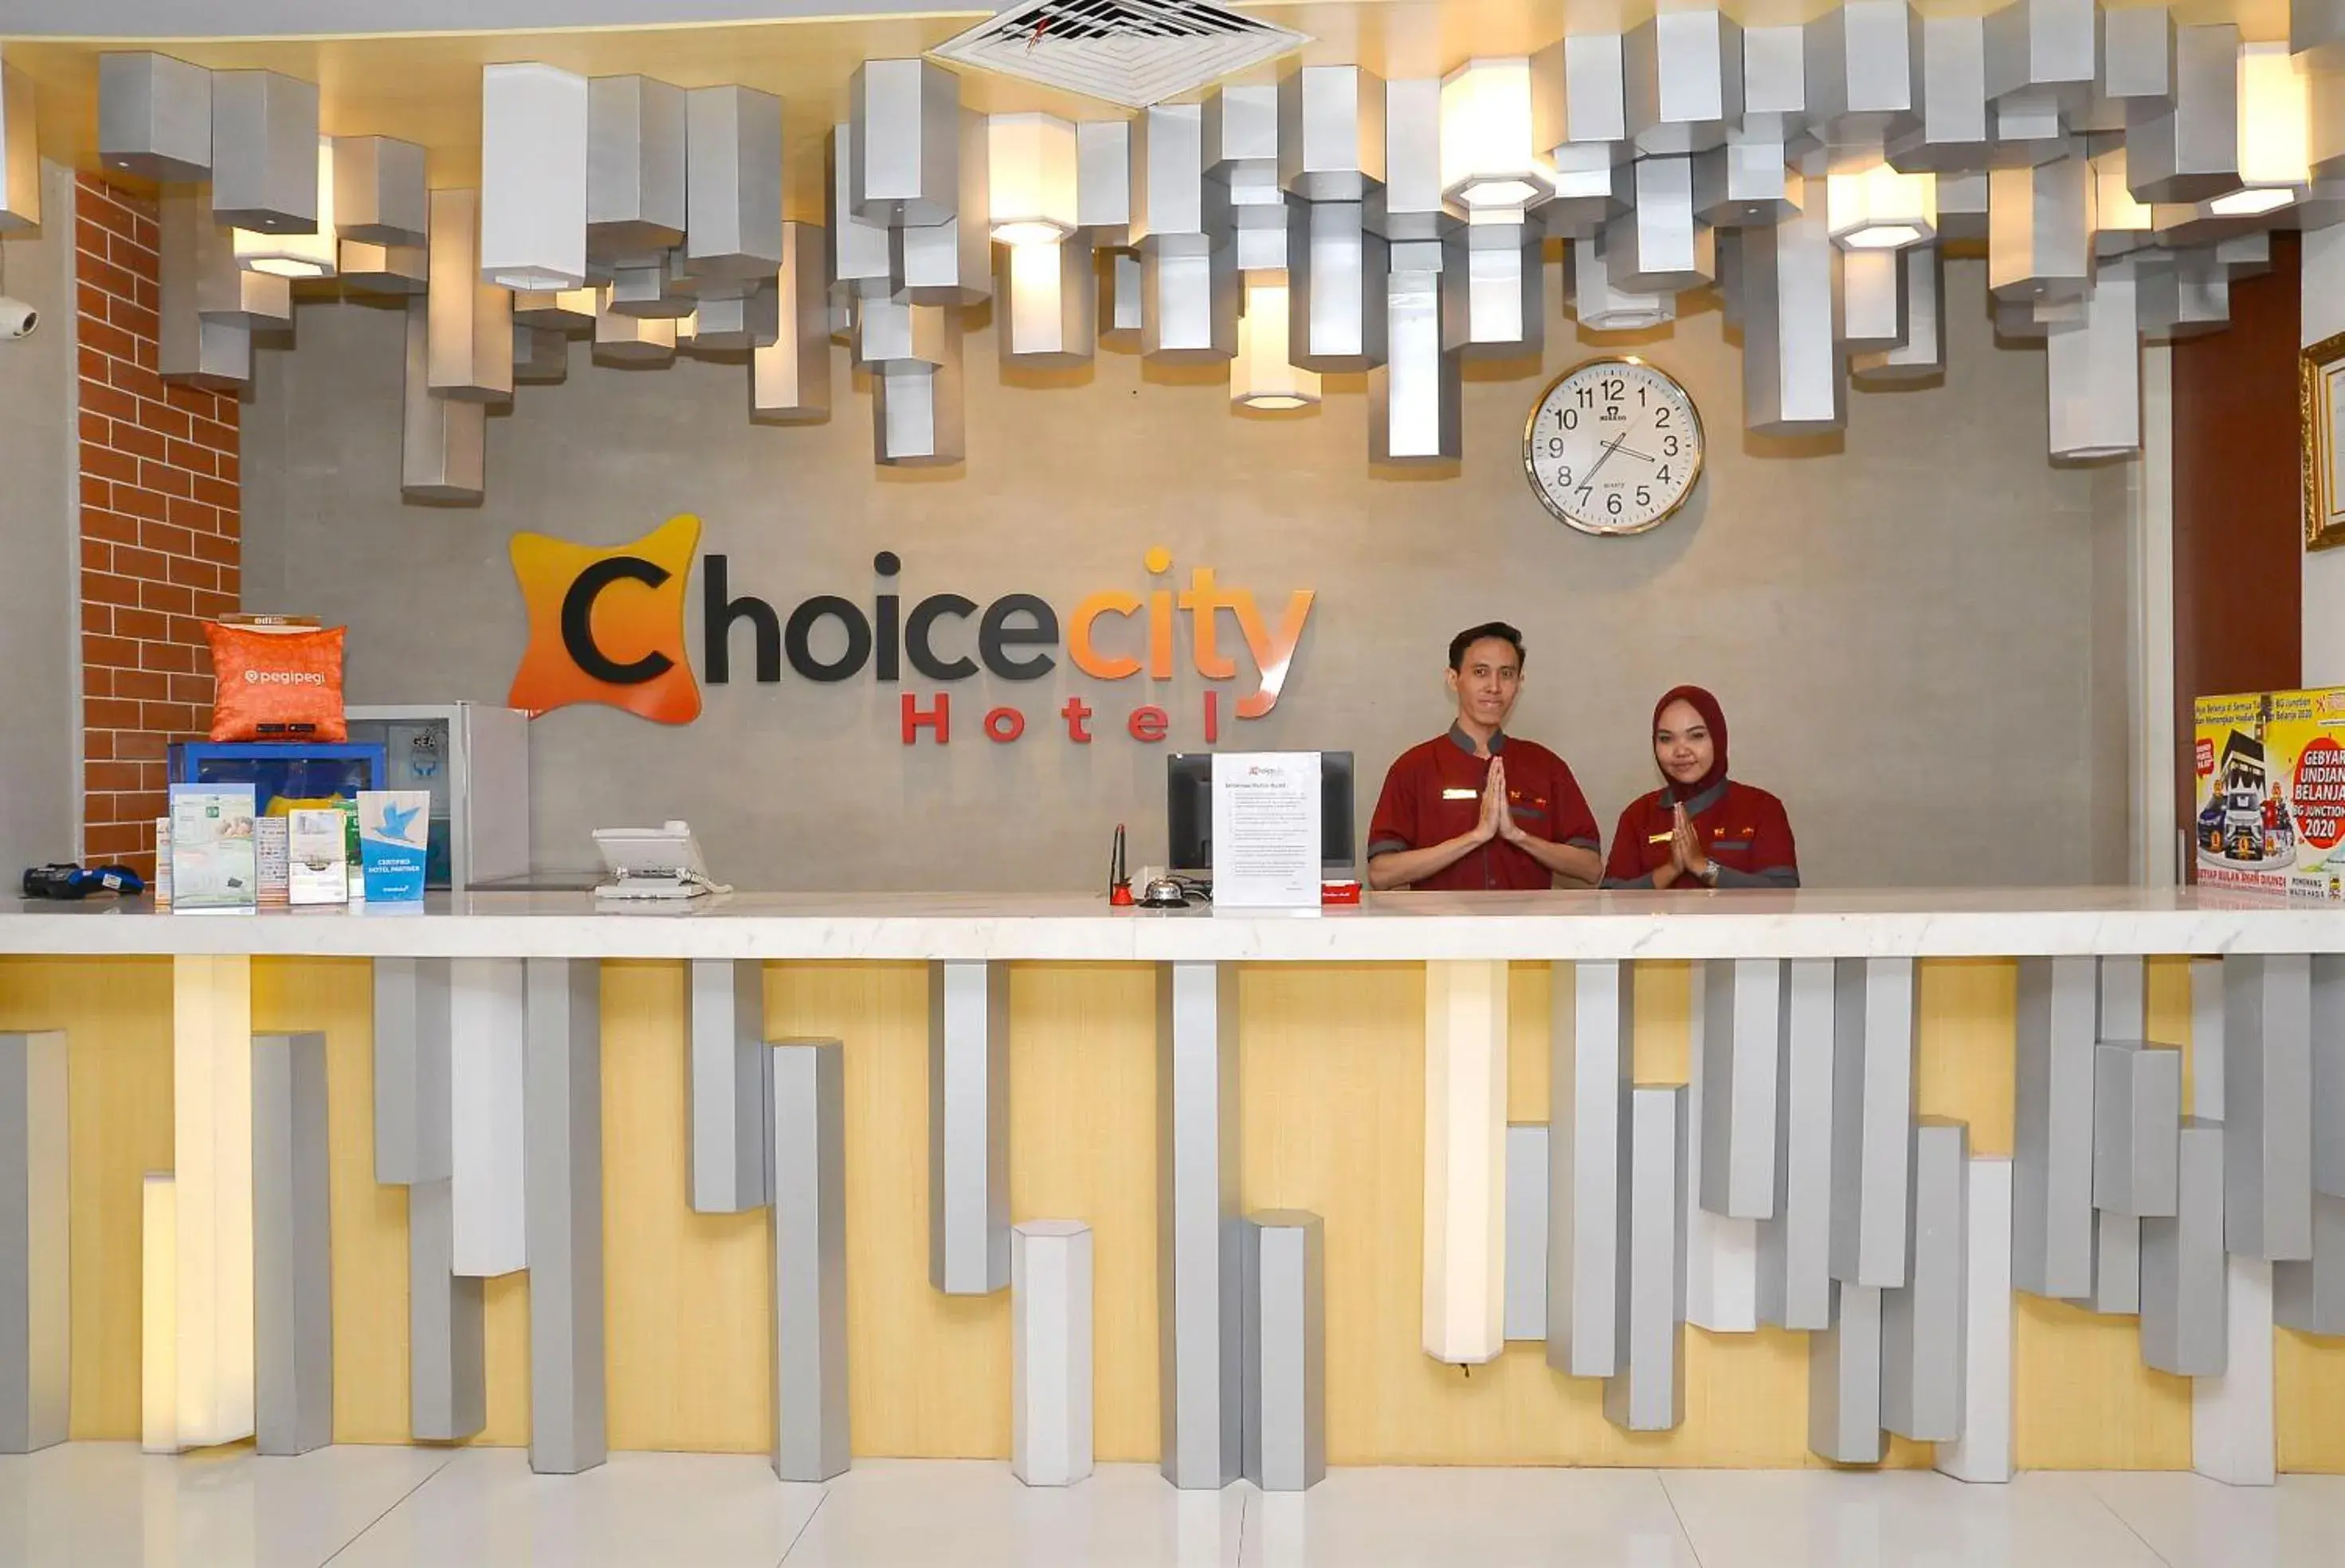 Staff in Choice City Hotel